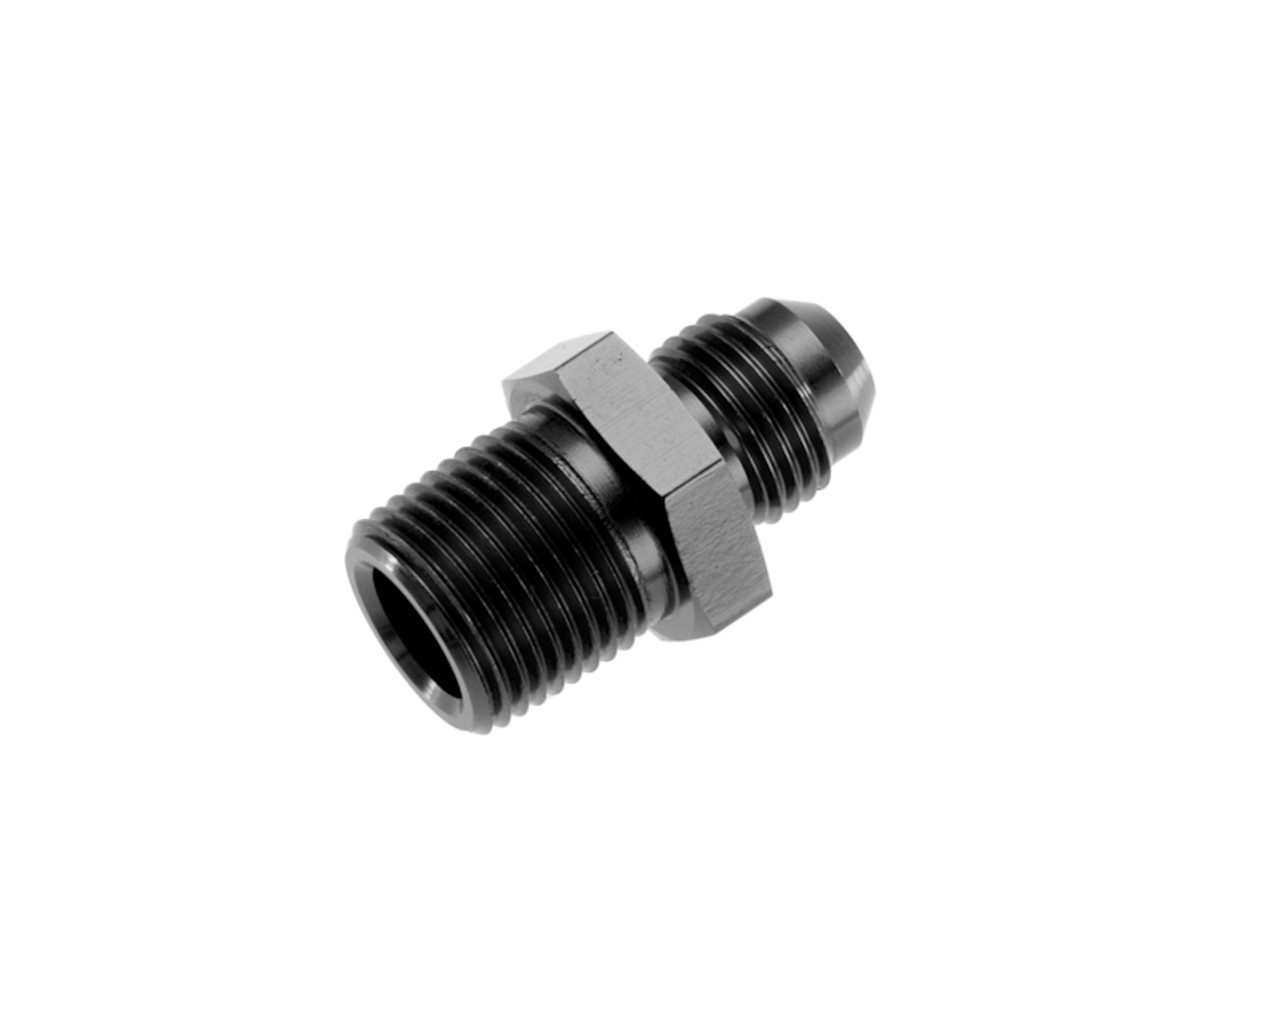 Redhorse Performance -04 straight male adapter to -06 (3/8″) NPT male